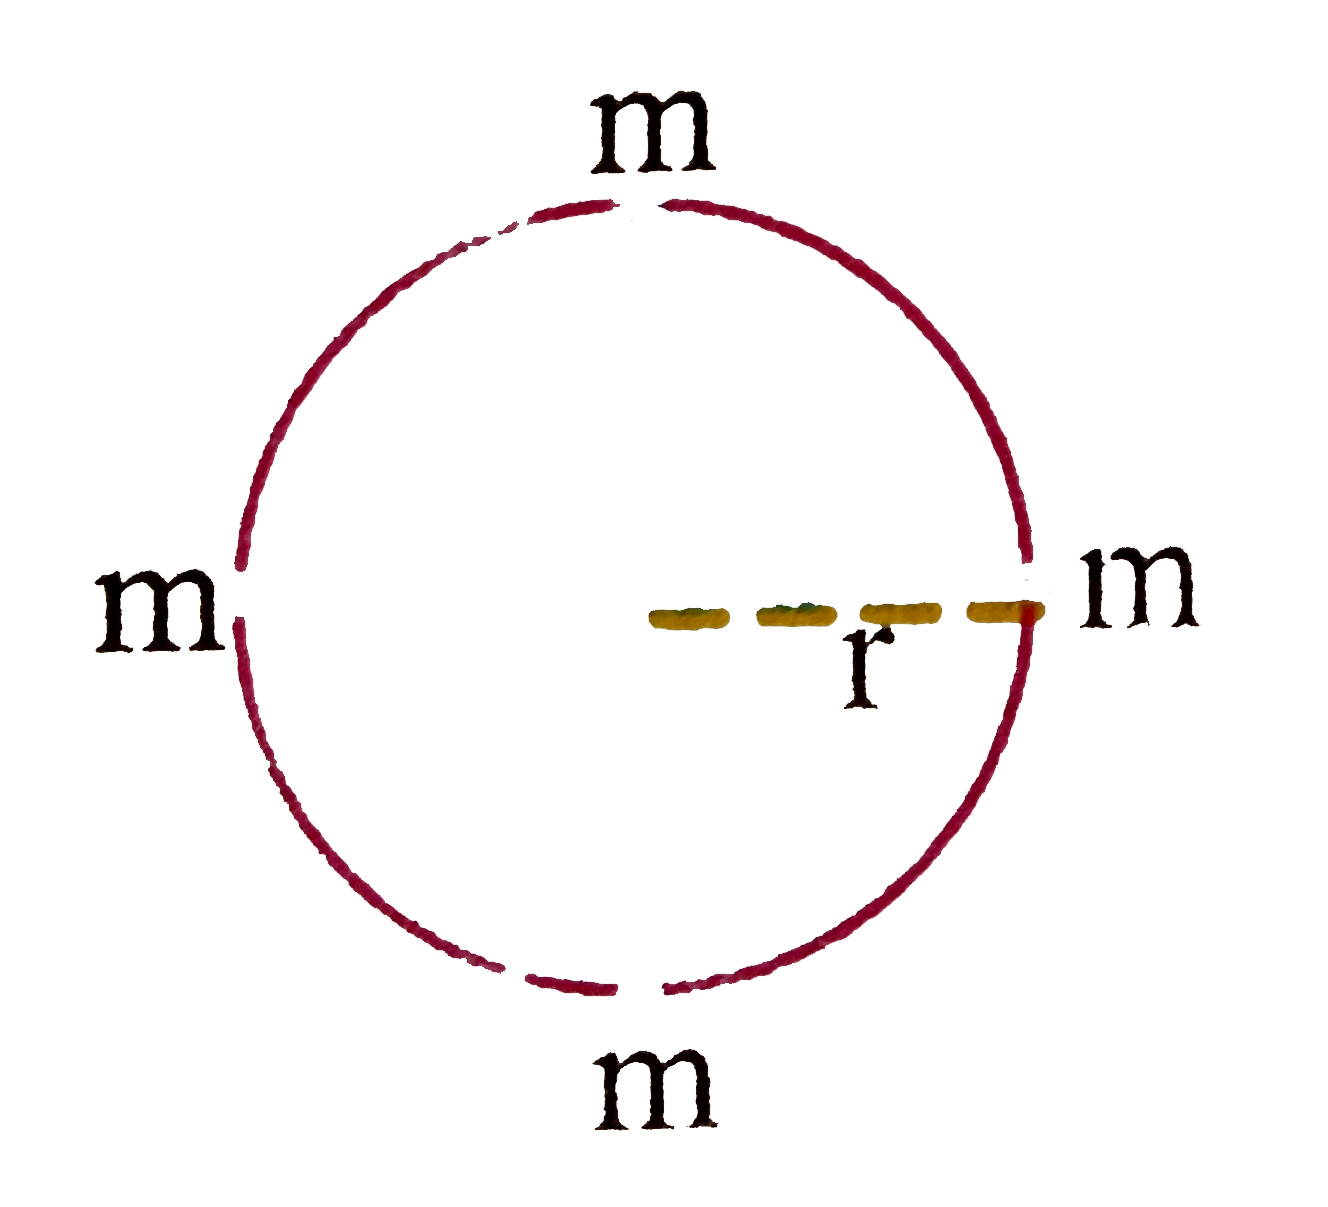 Four masses 'm' each are orbitinting  in a circular of radius r in the same direction under gravitational force. Velocityof each particle is